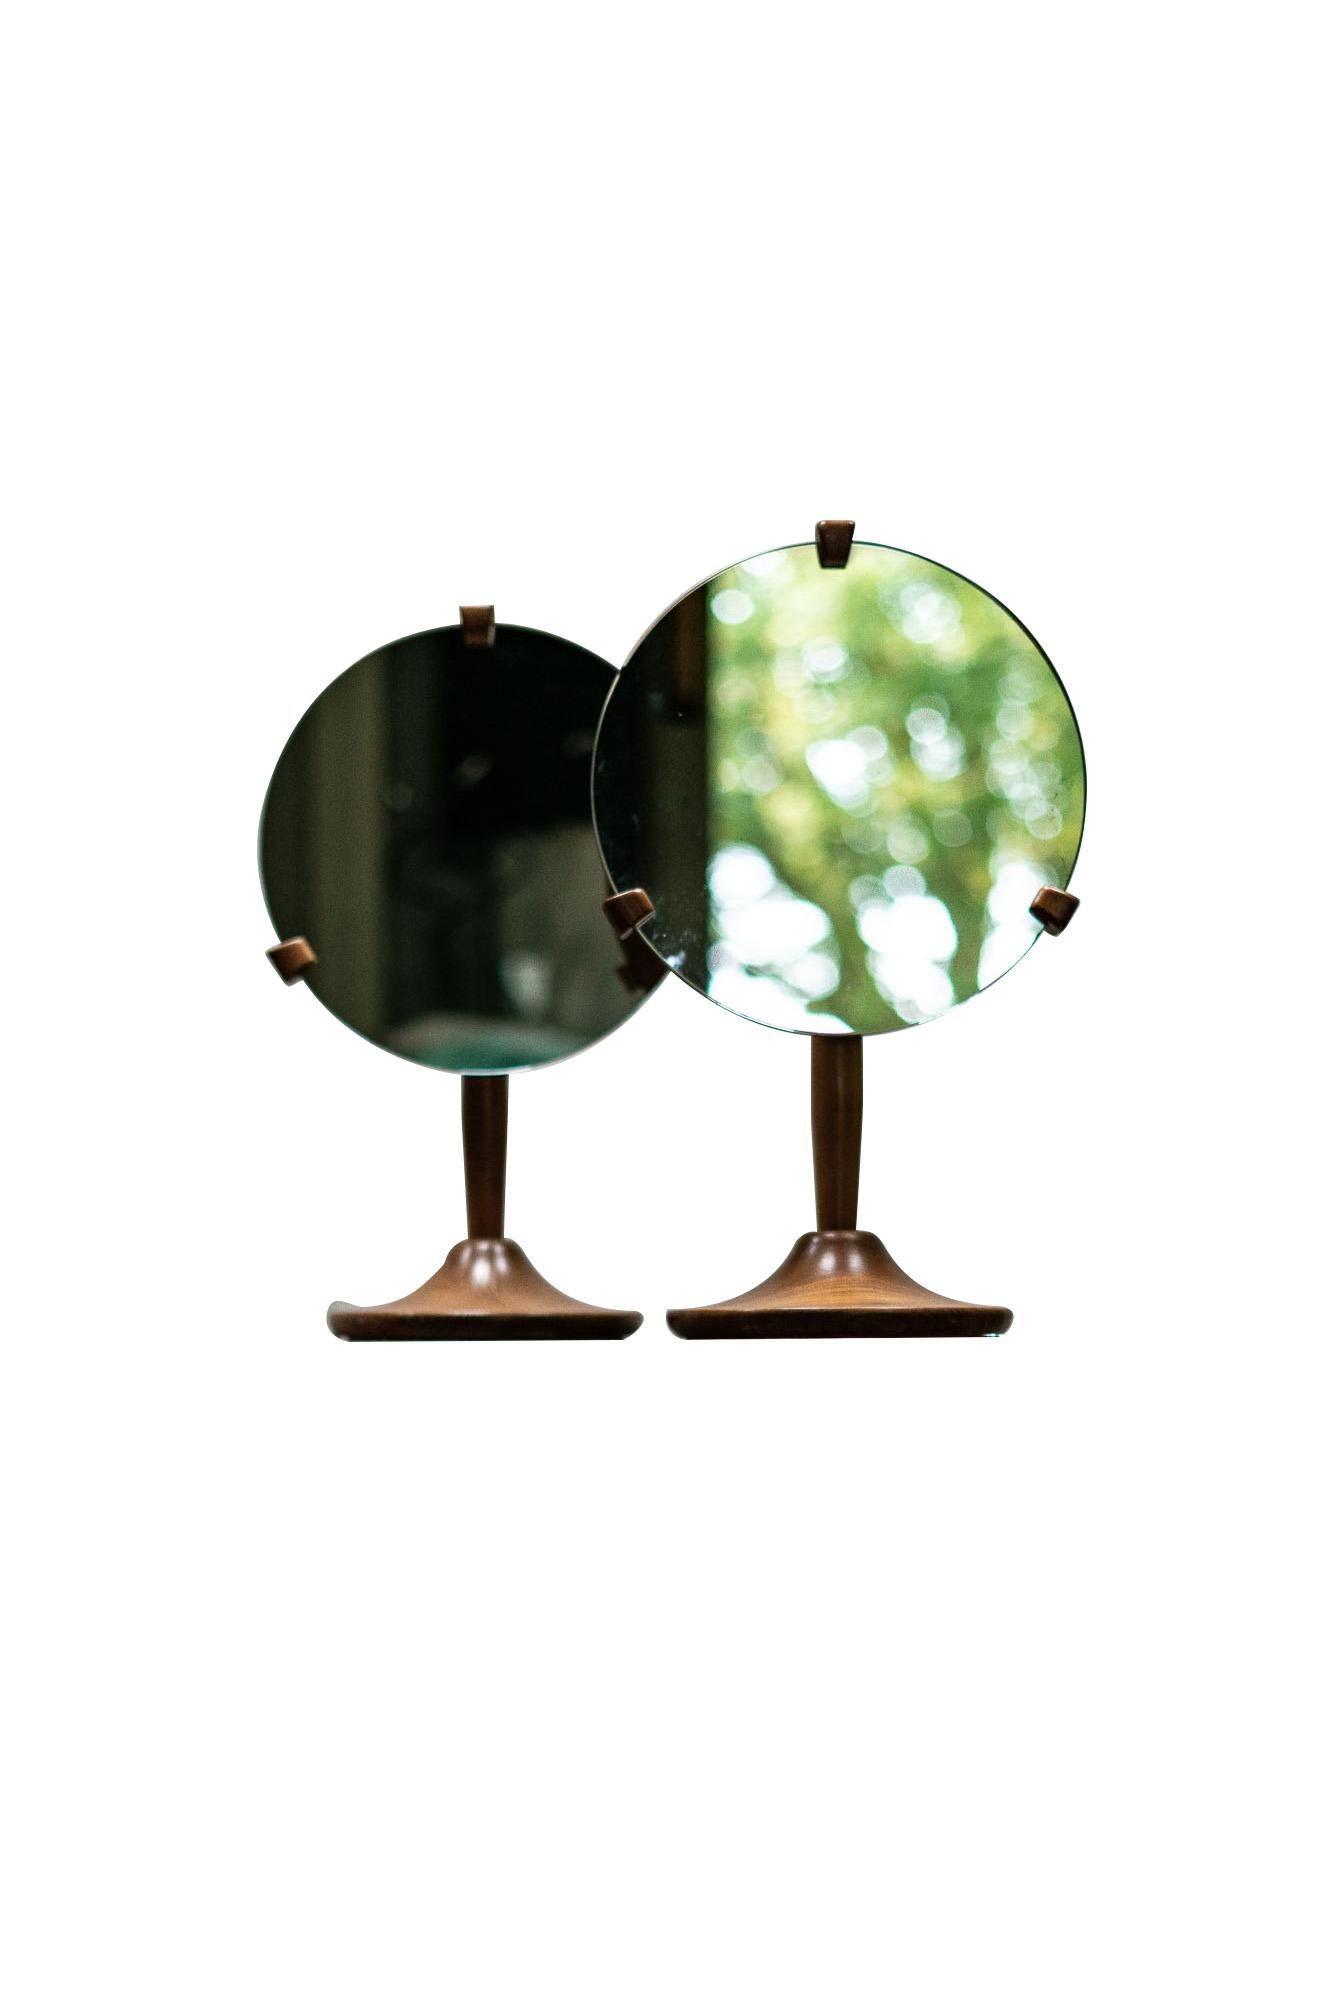 British Pair of Vanity Mirrors by Lucian Ercolani for Ercol, 1960s